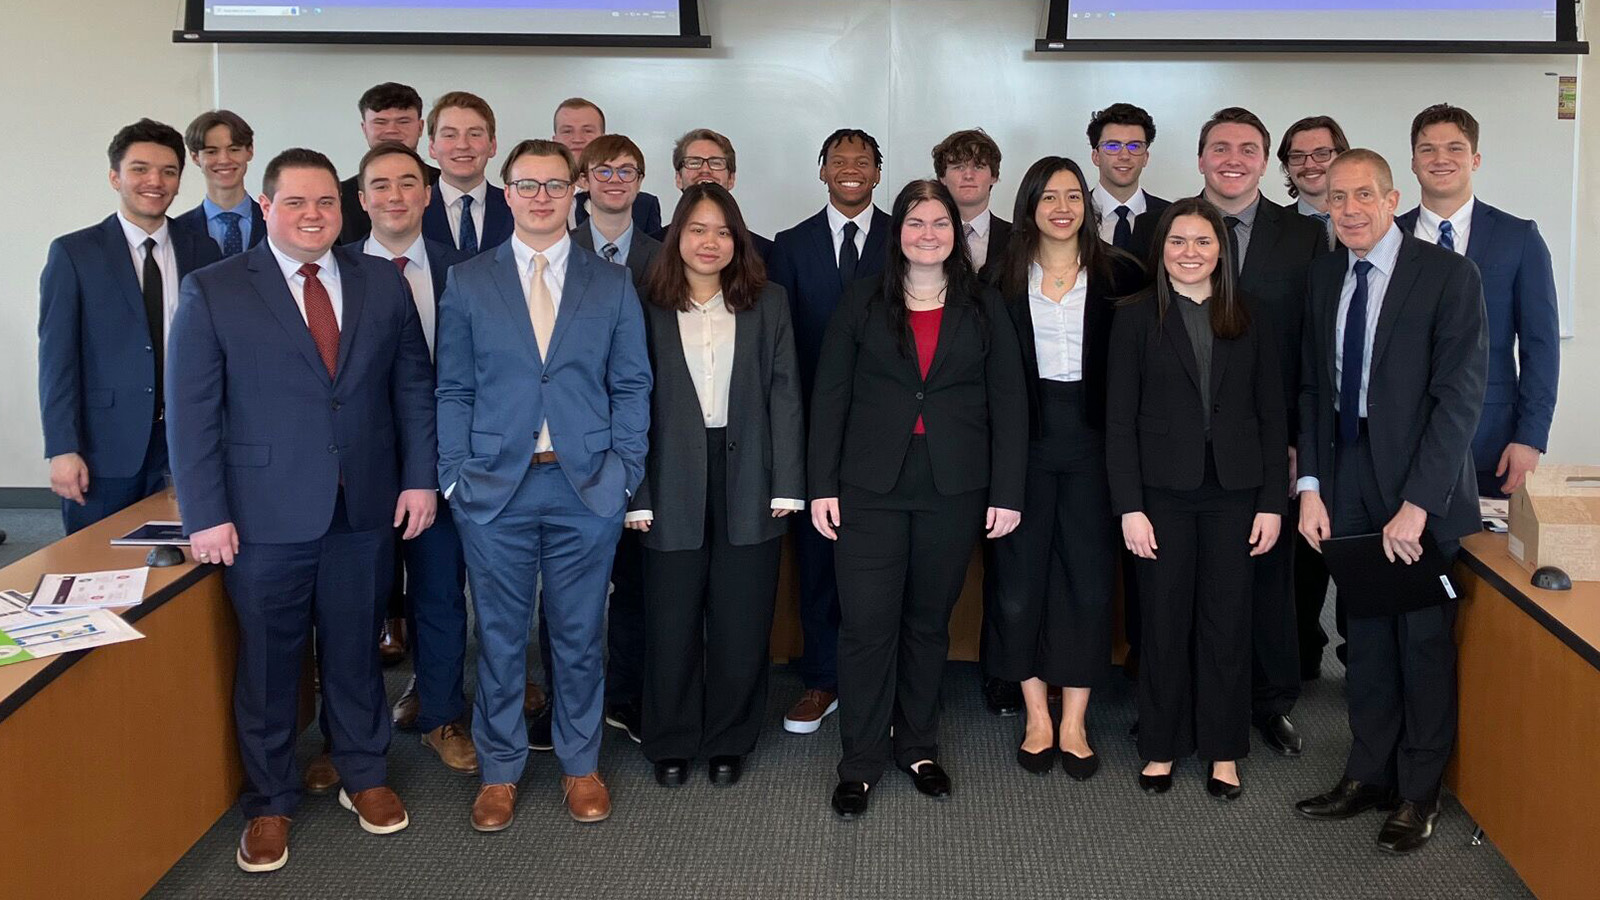 A picture of the five teams from CMU competed in the 2024 ACG Cup in Grand Rapids. They are professionally dressed and standing as a group in a boardroom.